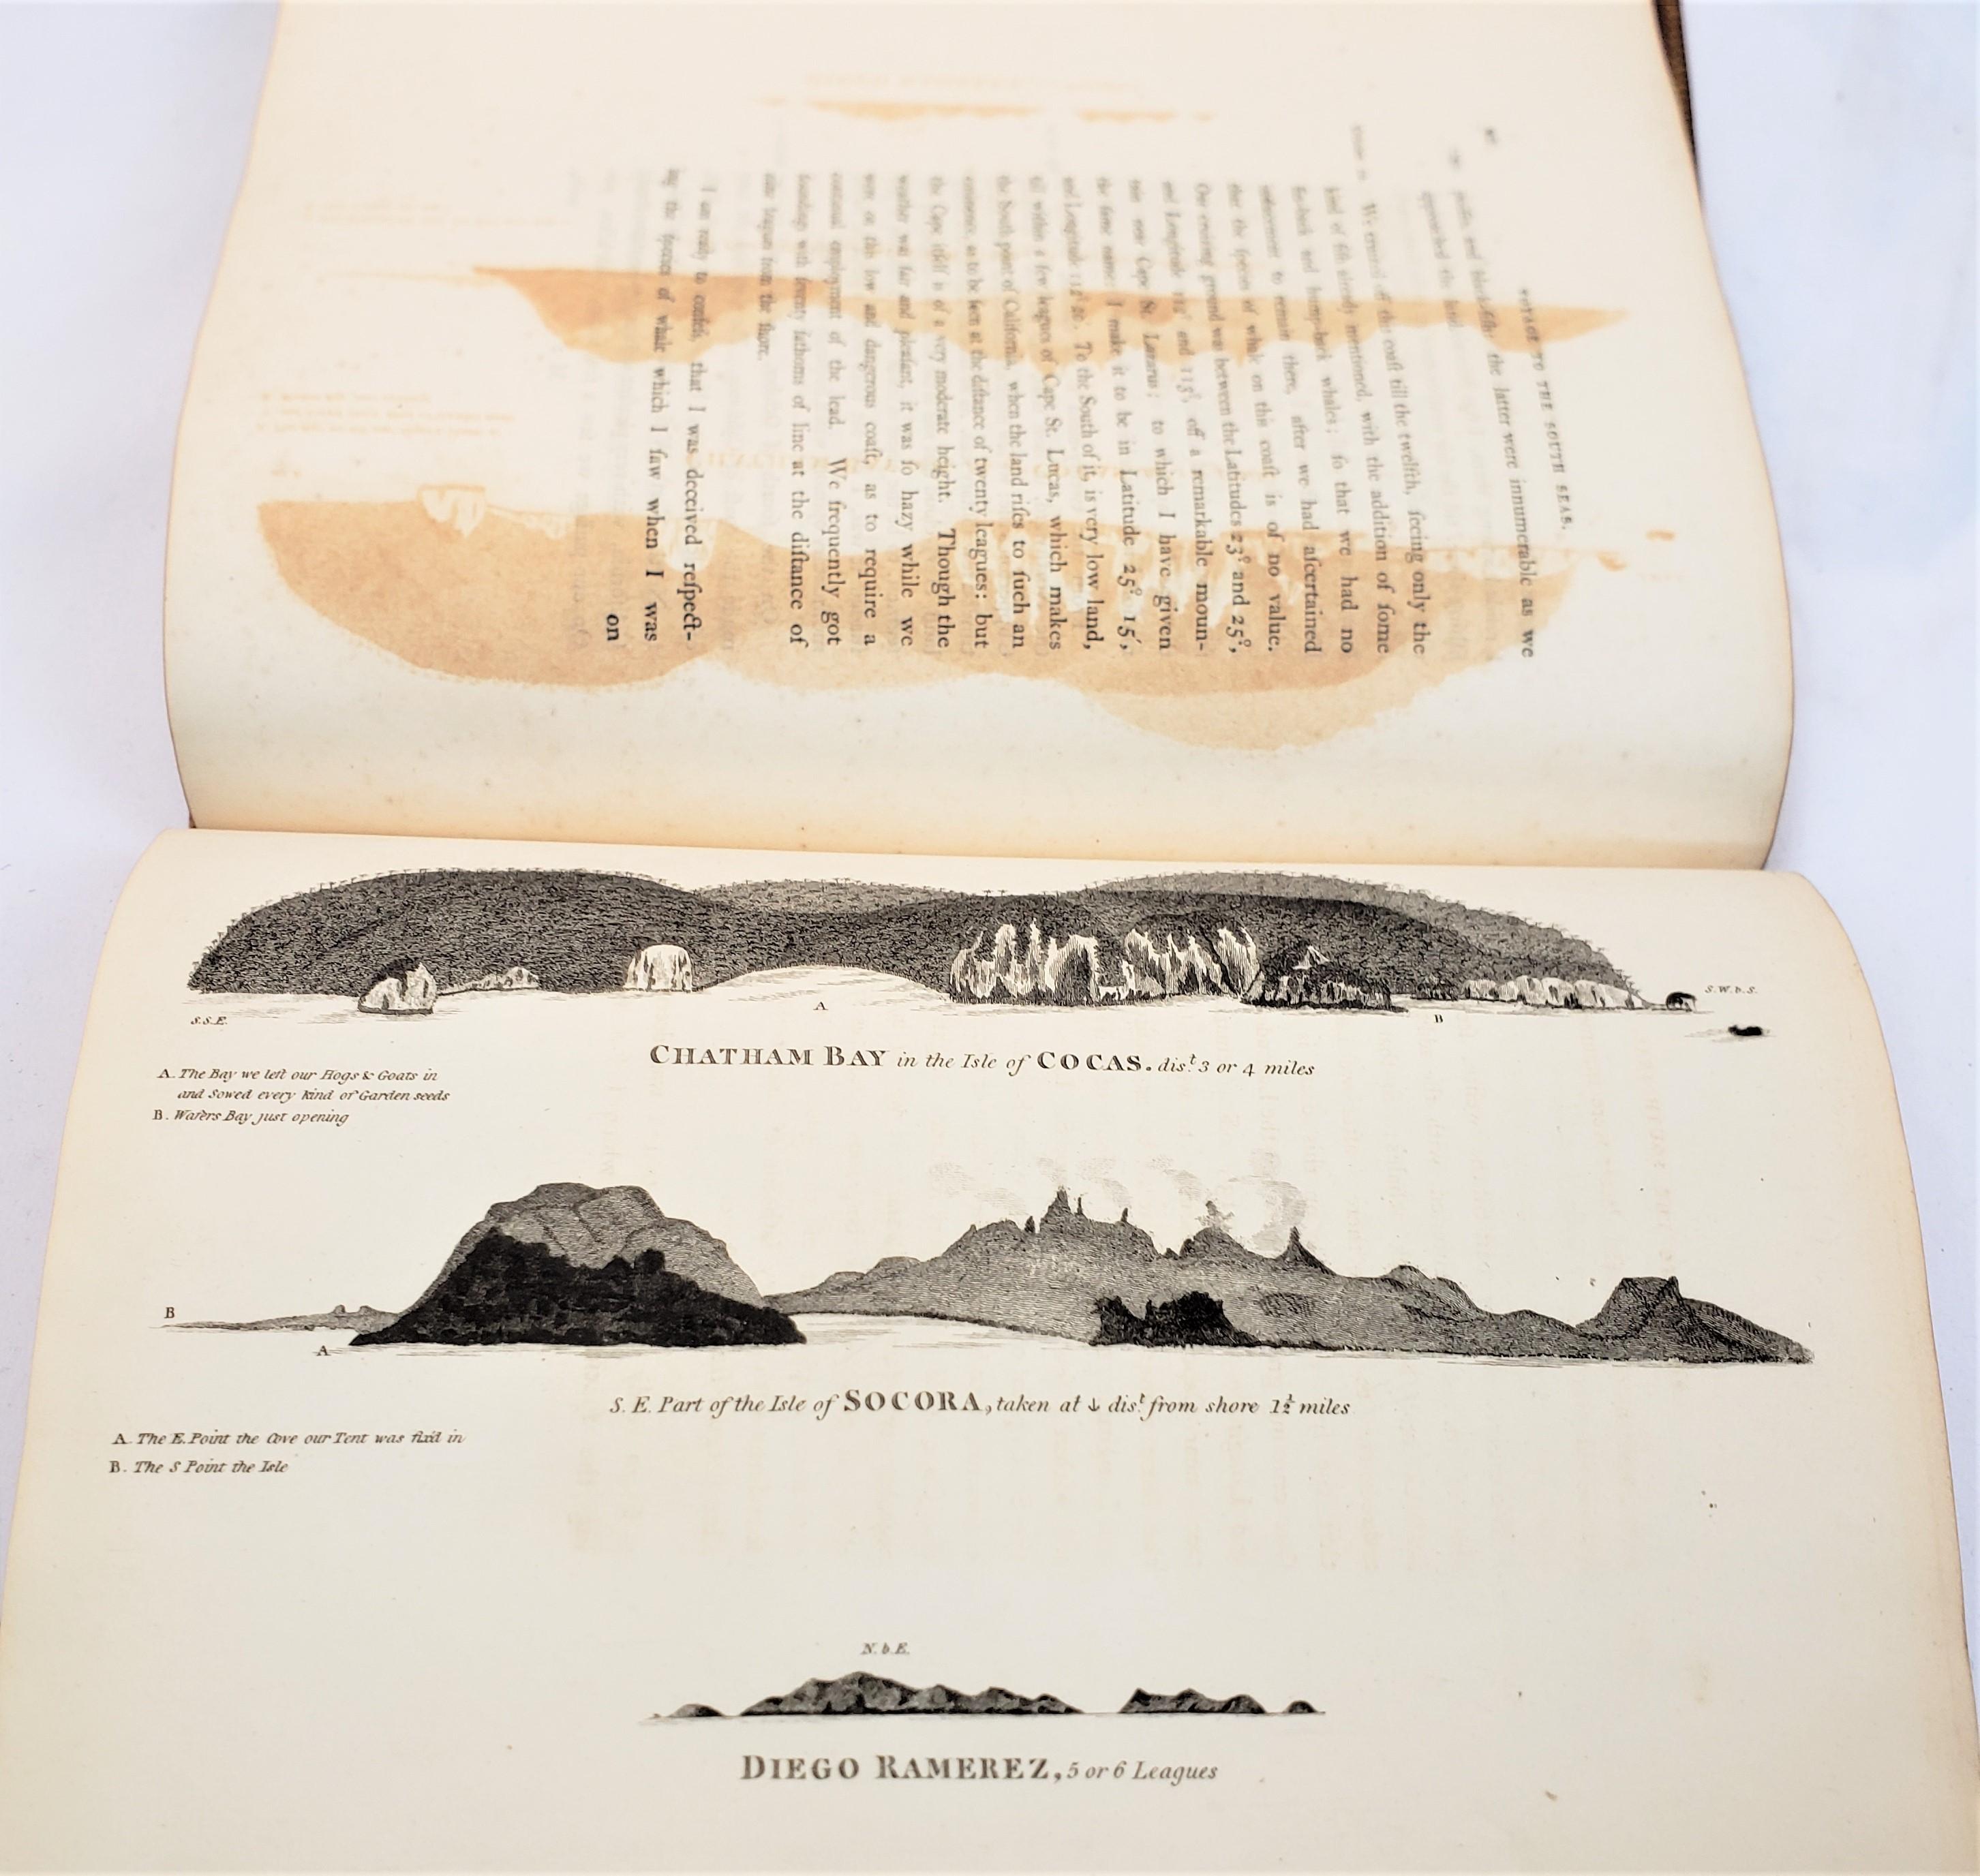 Antikes James Colnett-Buch „A Voyage to the South Atlantic & Round Cape“, 1798 im Angebot 10